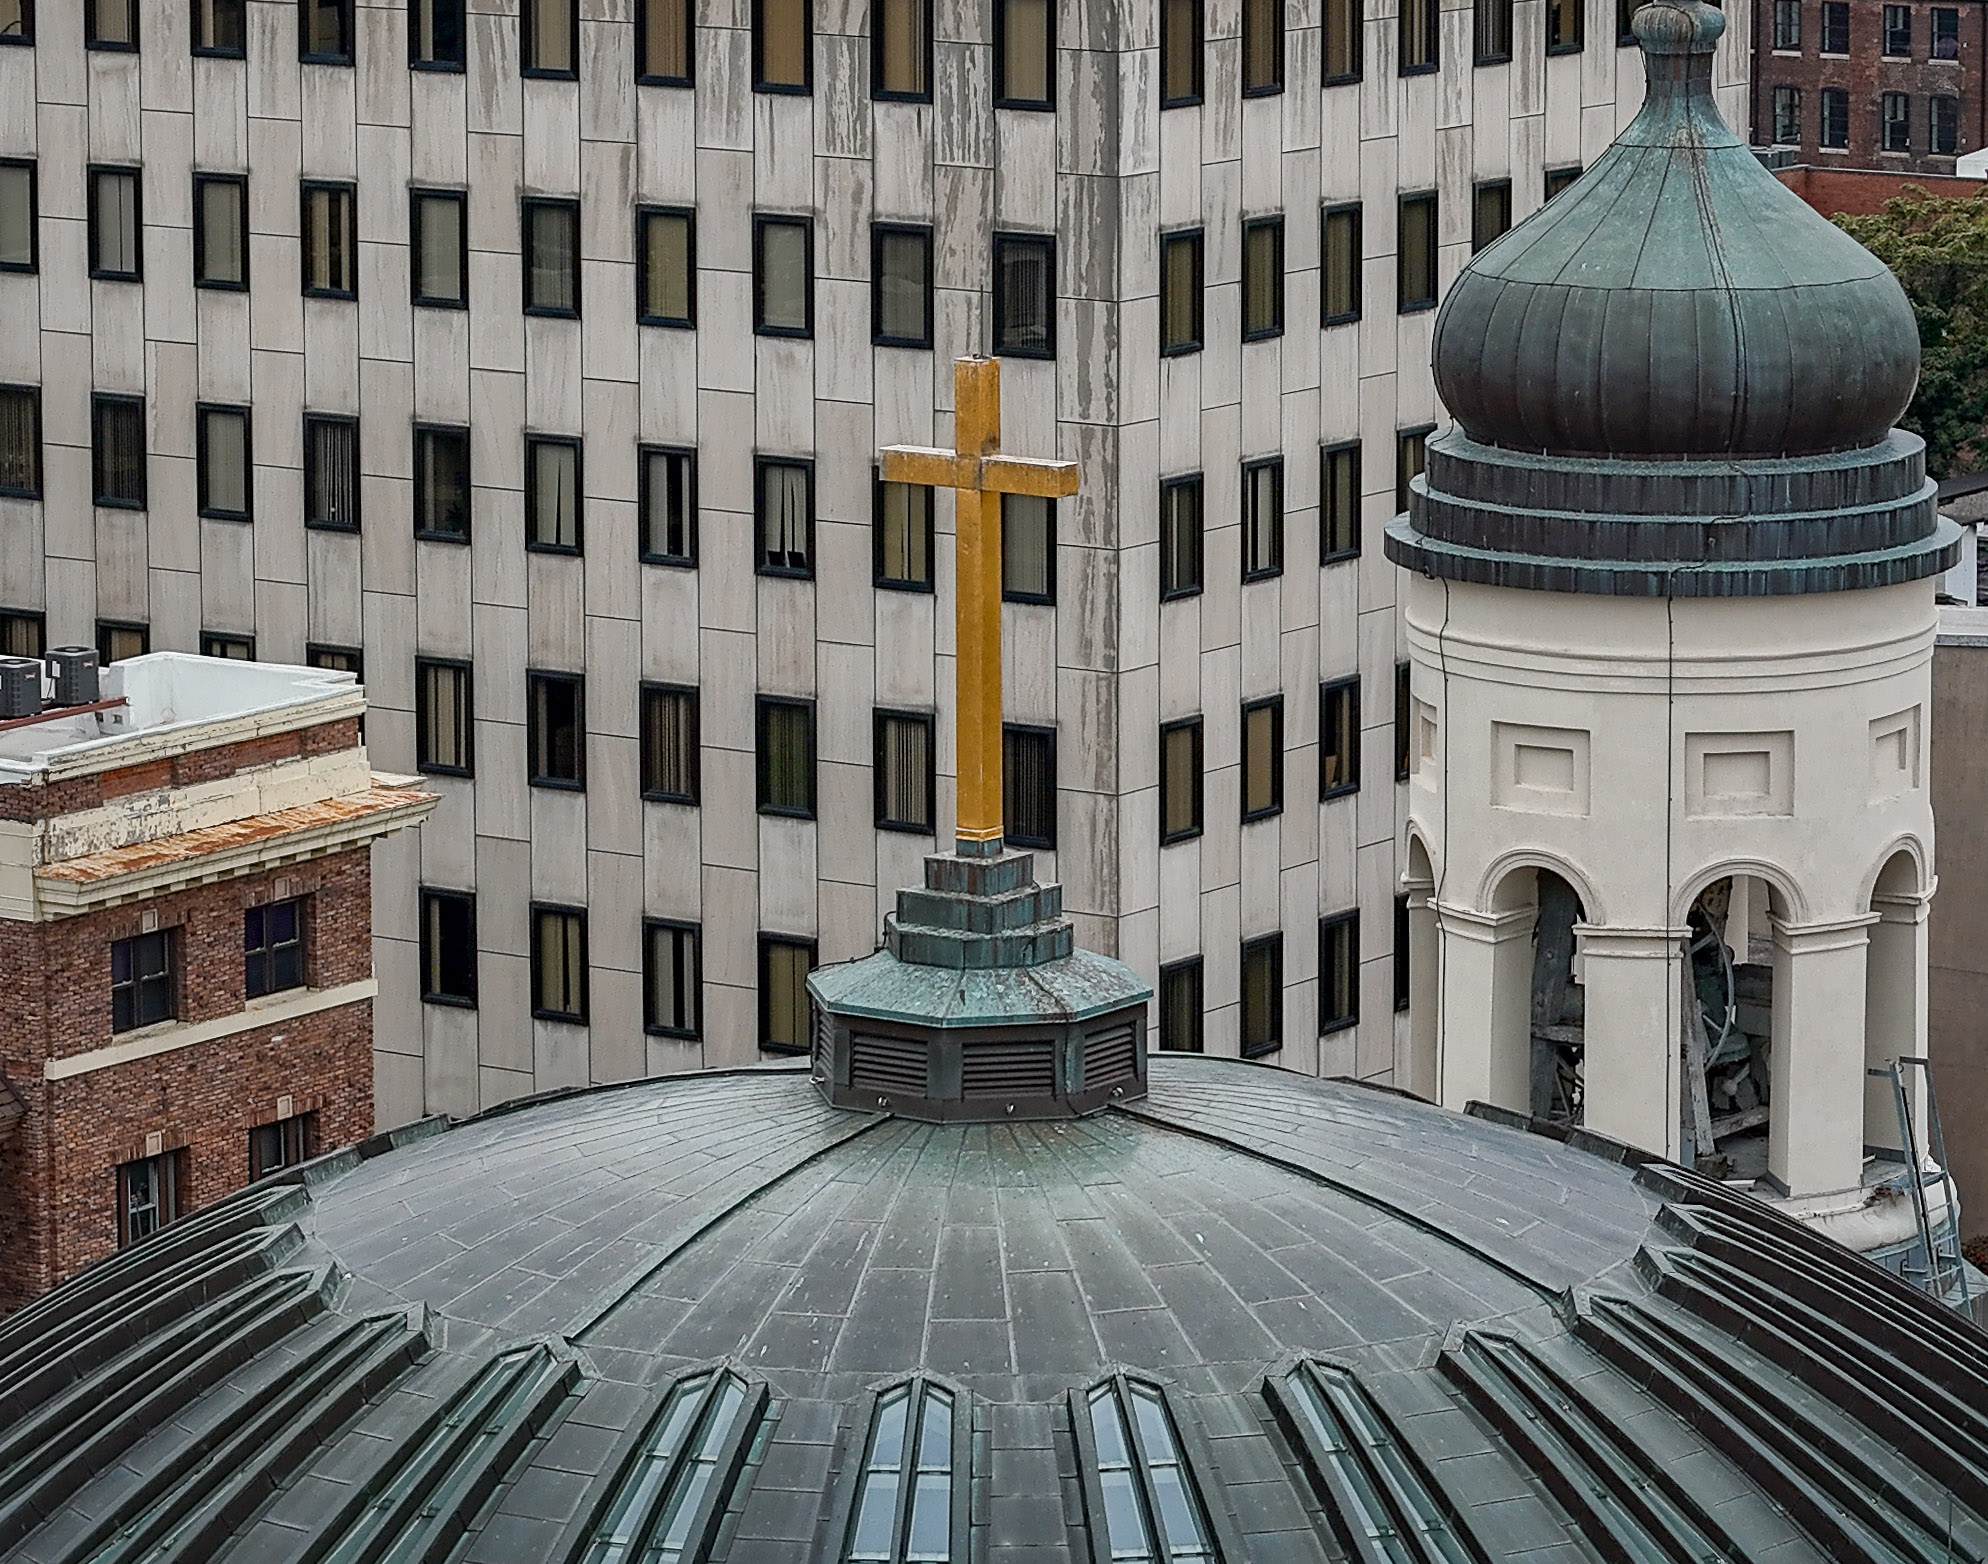 A gold cross is seen on the dome of the Baltimore Basilica on Cathedral Street across from the Baltimore Archdiocese headquarters. The Basilica, officially the Basilica of the National Shrine of the Assumption of the Blessed Virgin Mary, was the first Roman Catholic cathedral built in the United States. File. (Jerry Jackson/Baltimore Sun)